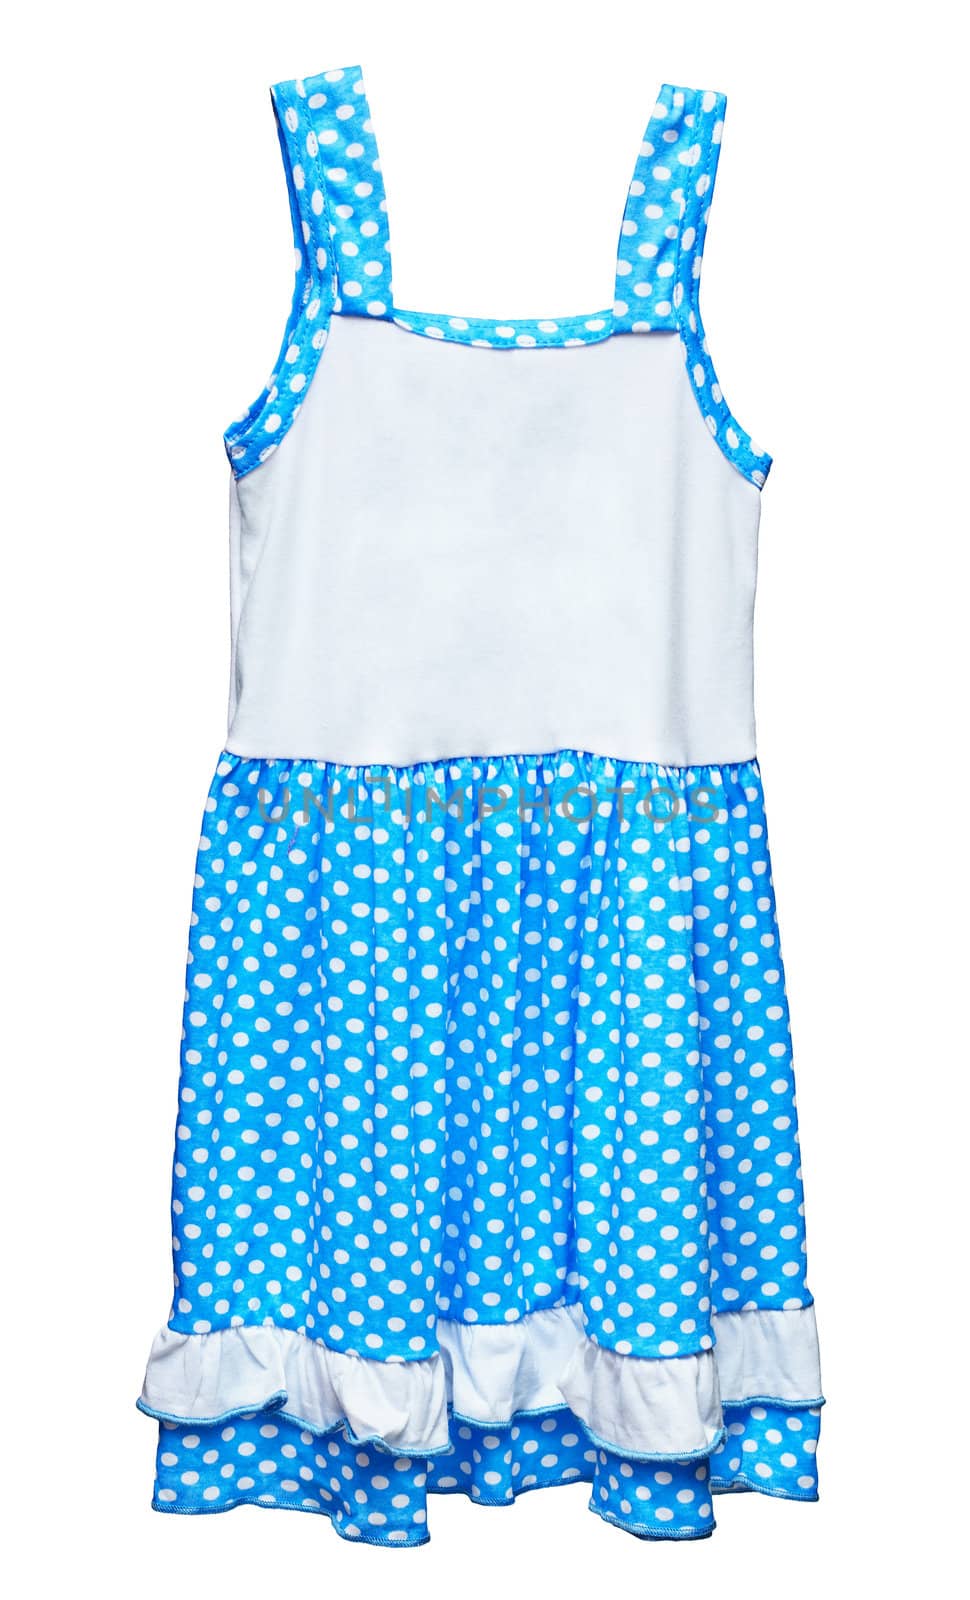 Simple blue dress for girl on white background by pzaxe